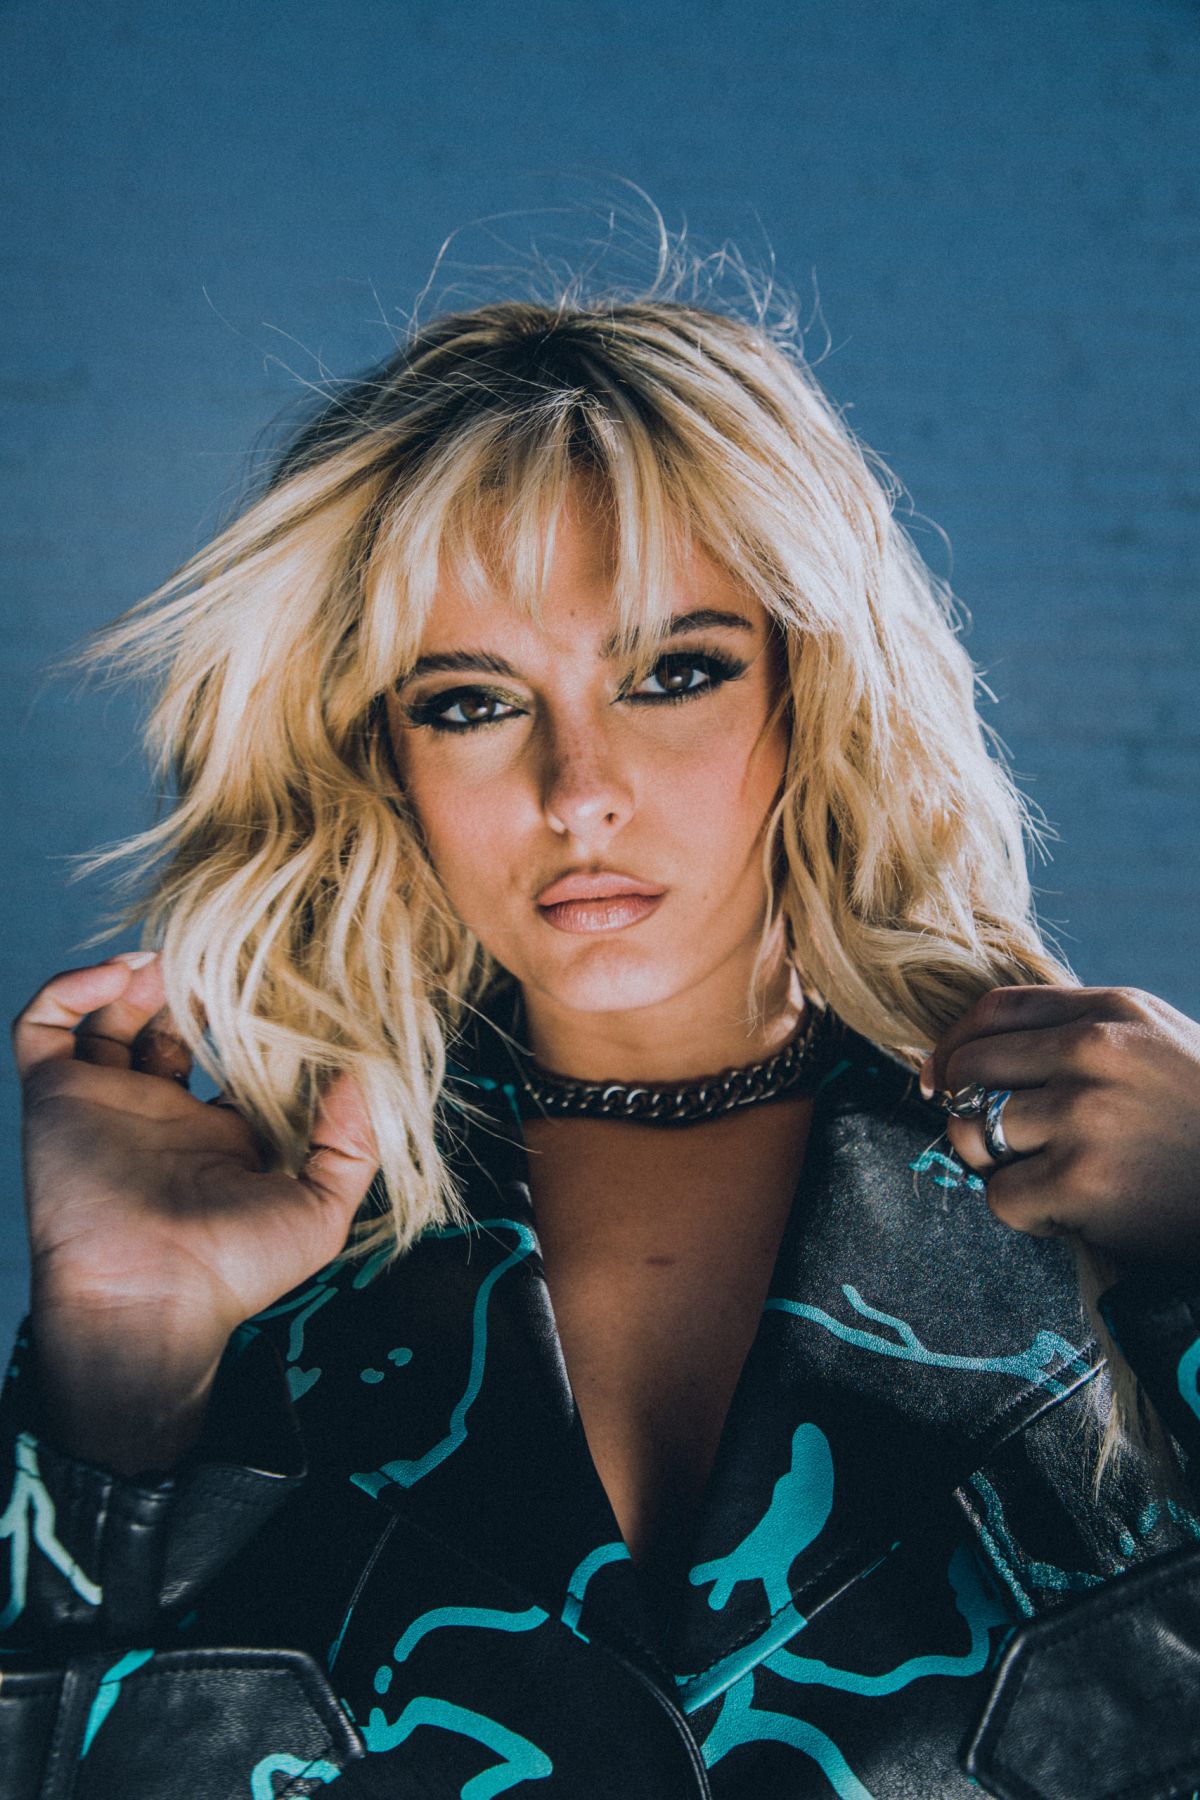 bebe-rexha-for-interview-magazine-may-2021-0.jpg